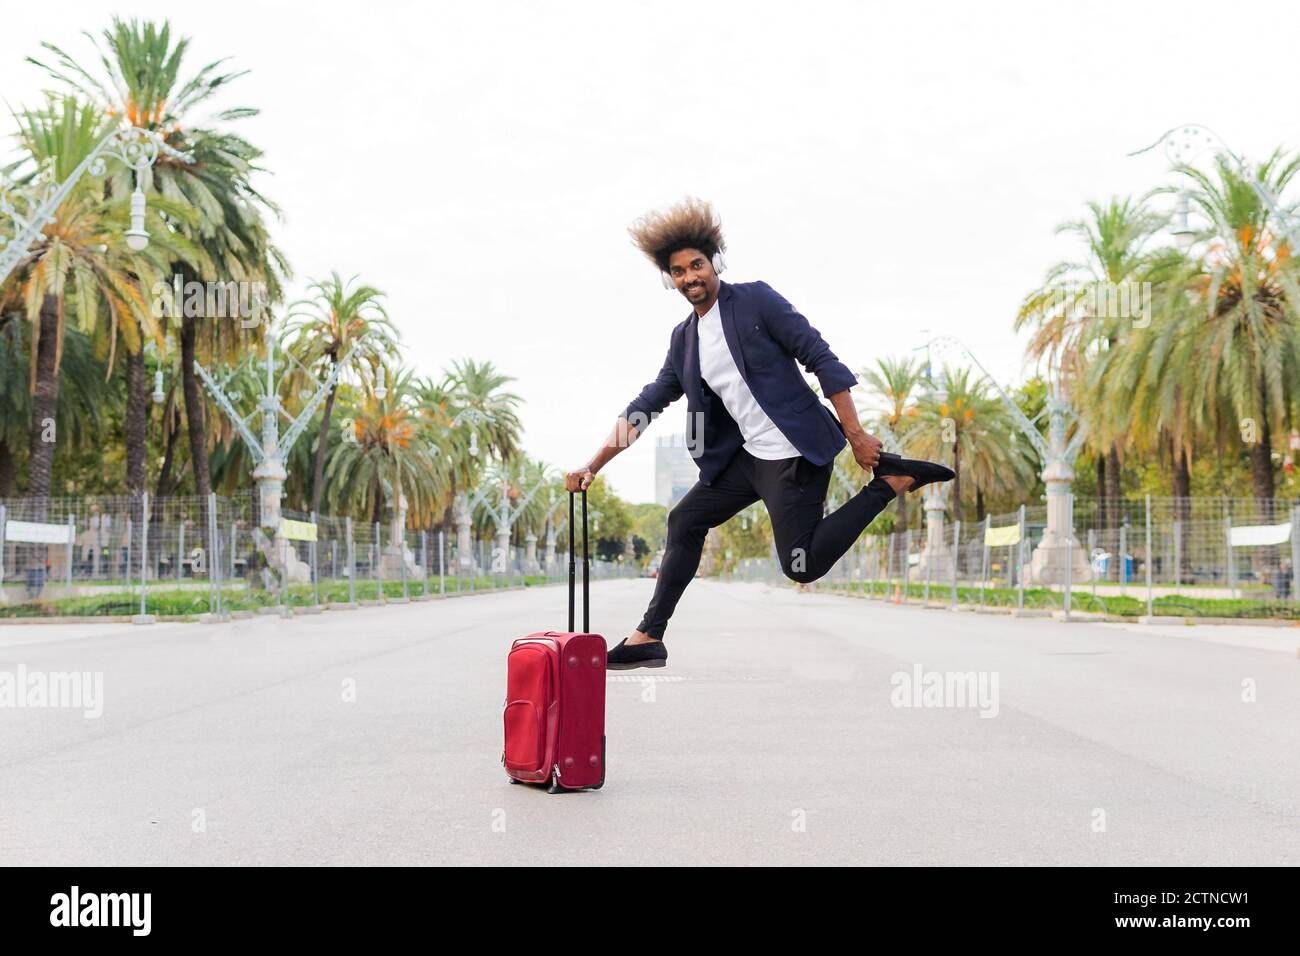 Young black man in a suit jumping and listening to music while clutching a wheeled suitcase and facing the camera on the street Stock Photo